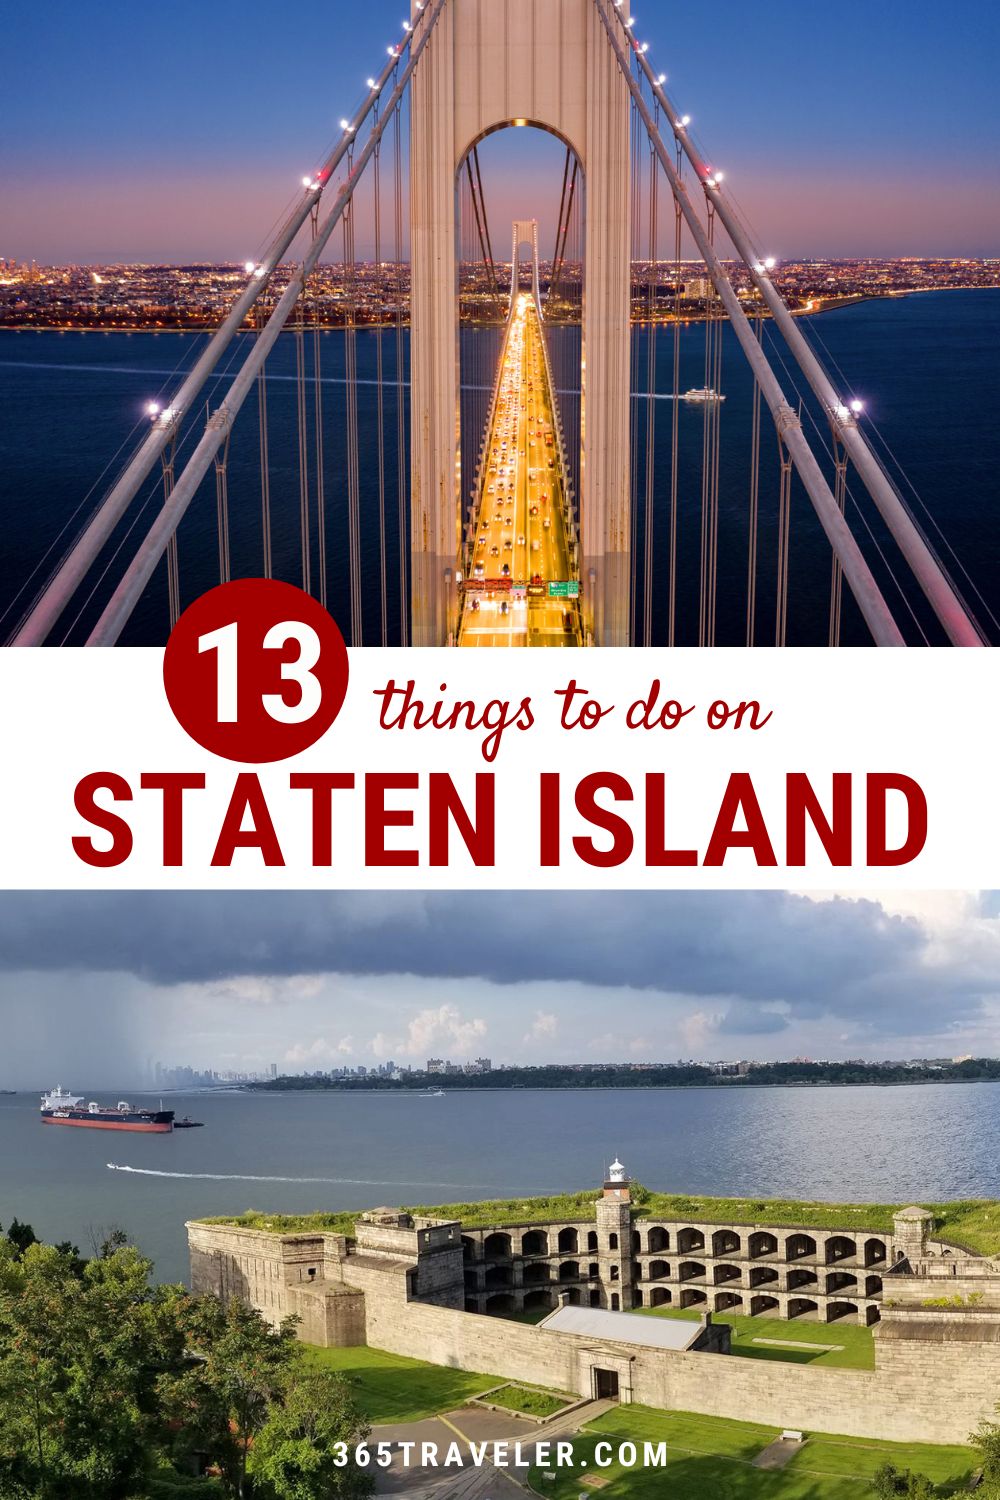 13 Things To Do on Staten Island You Can’t Miss